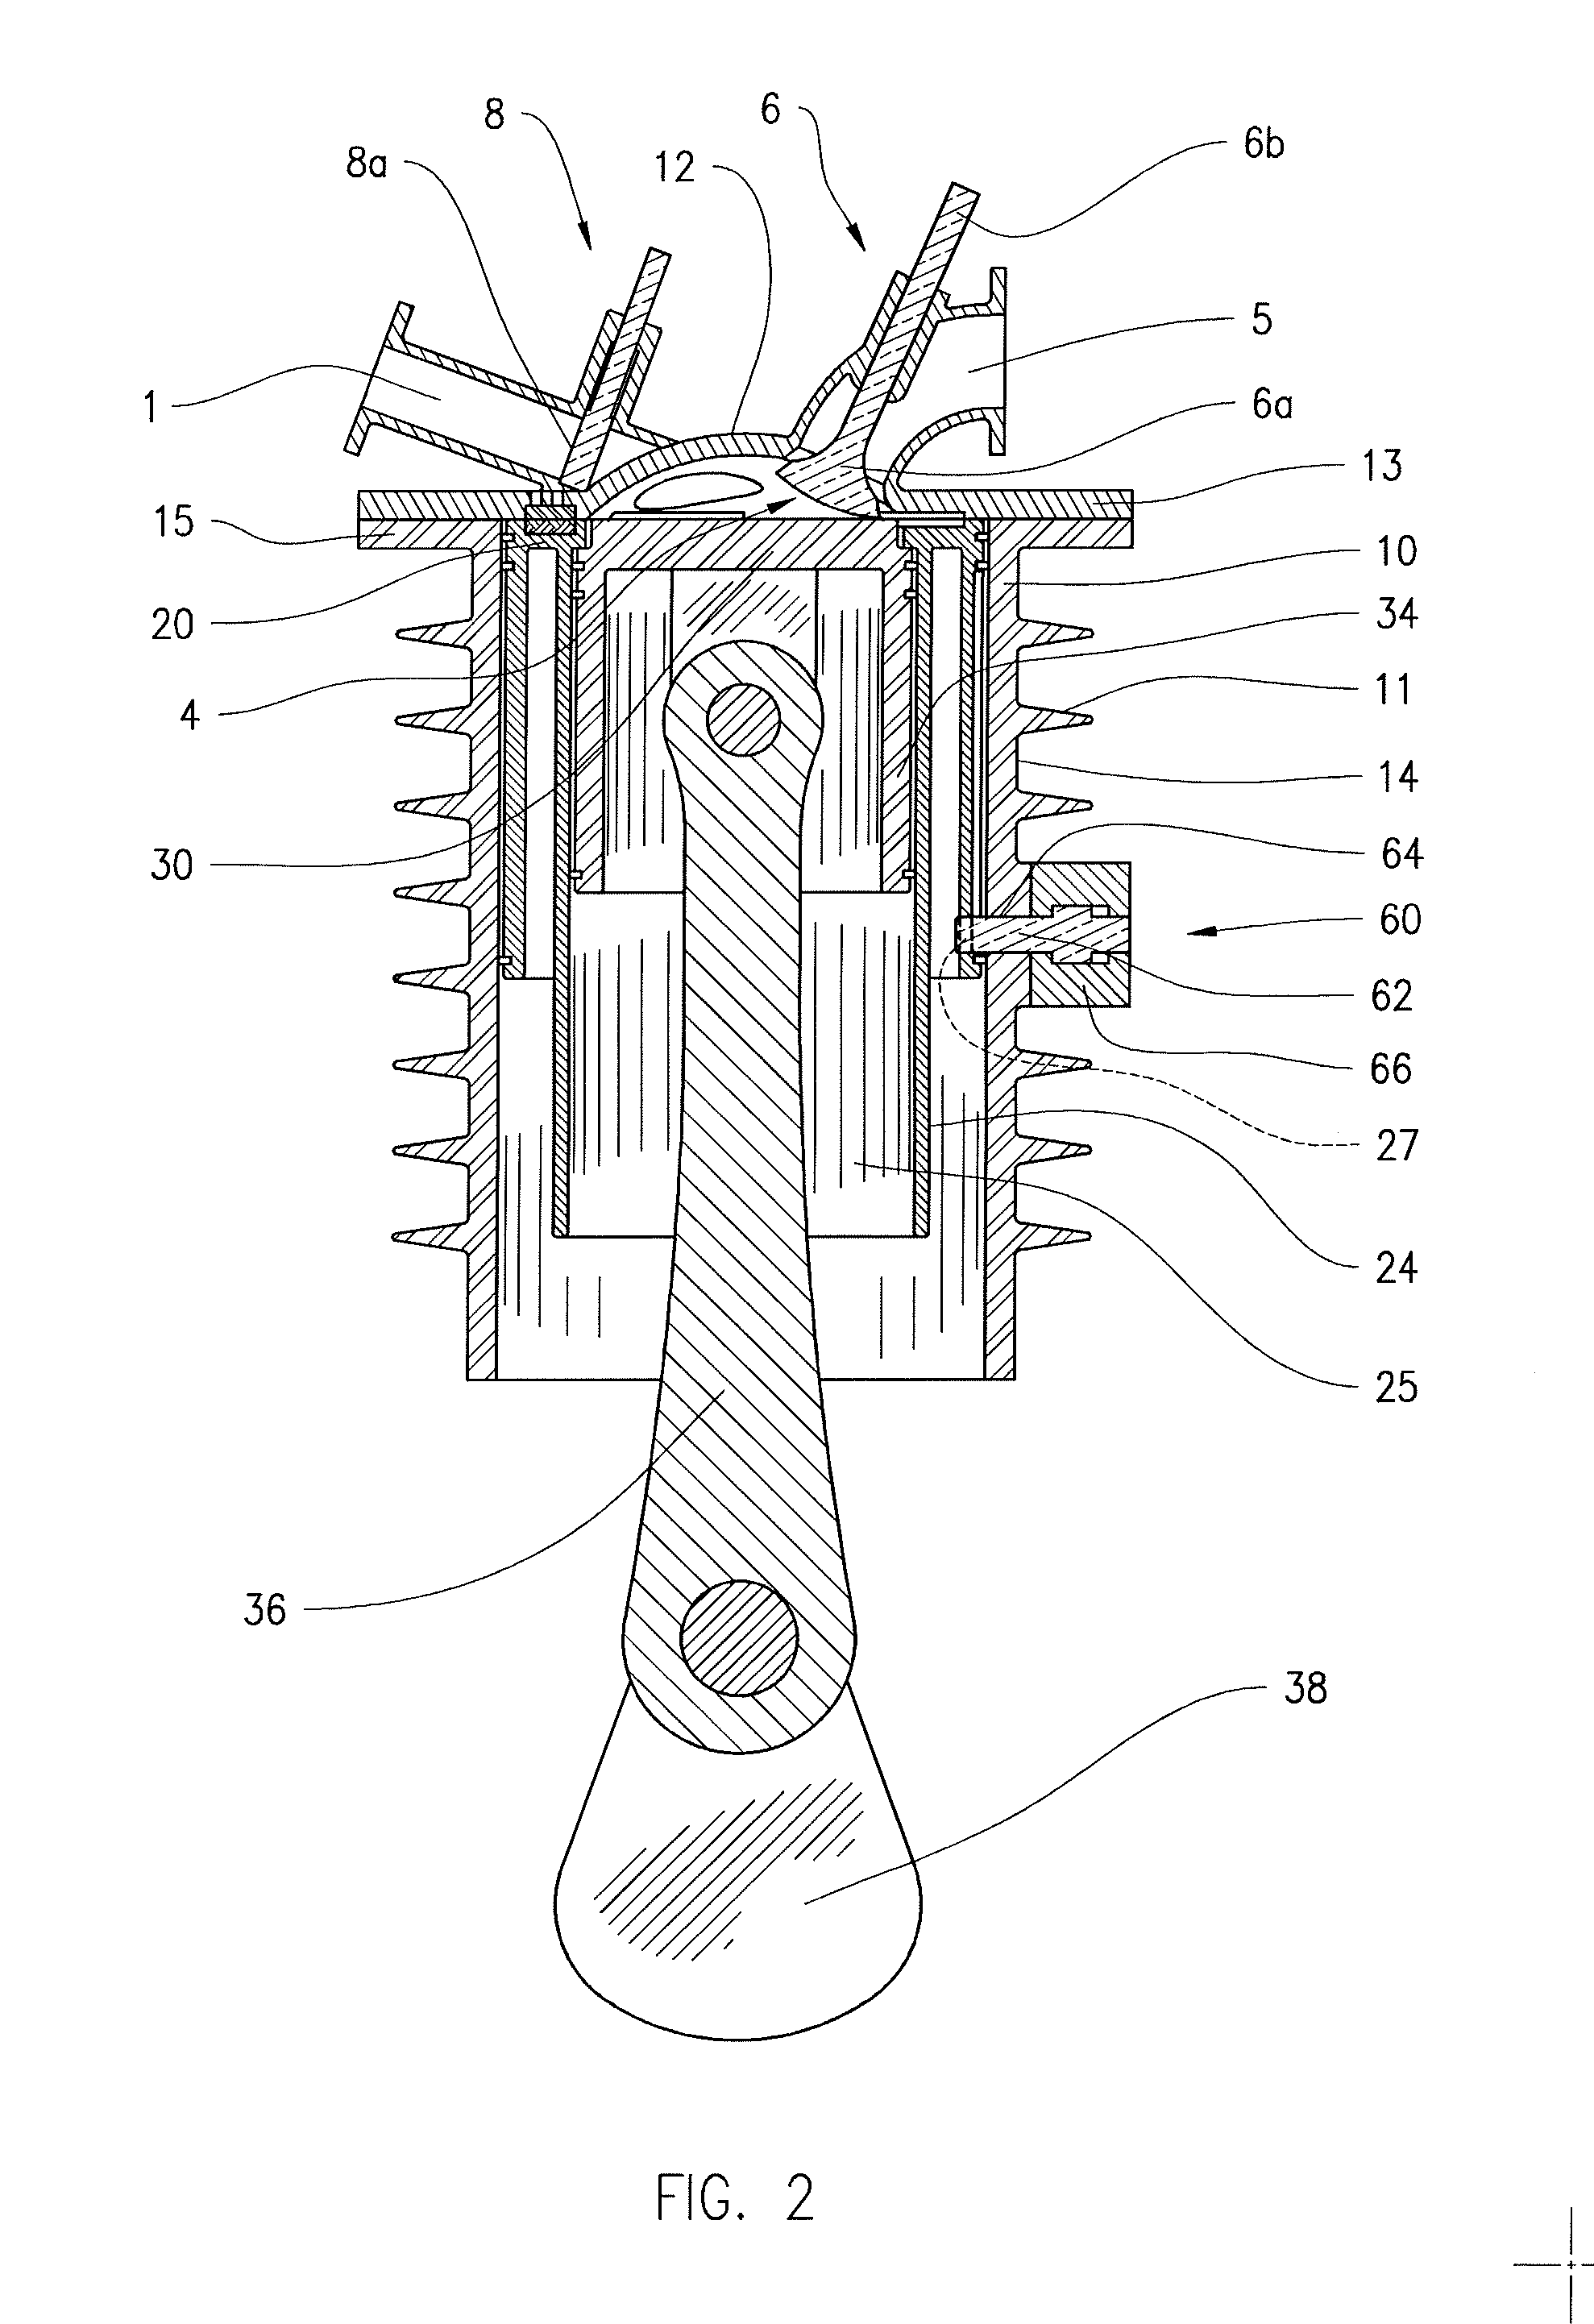 Full expansion internal combustion engine with co-annular pistons